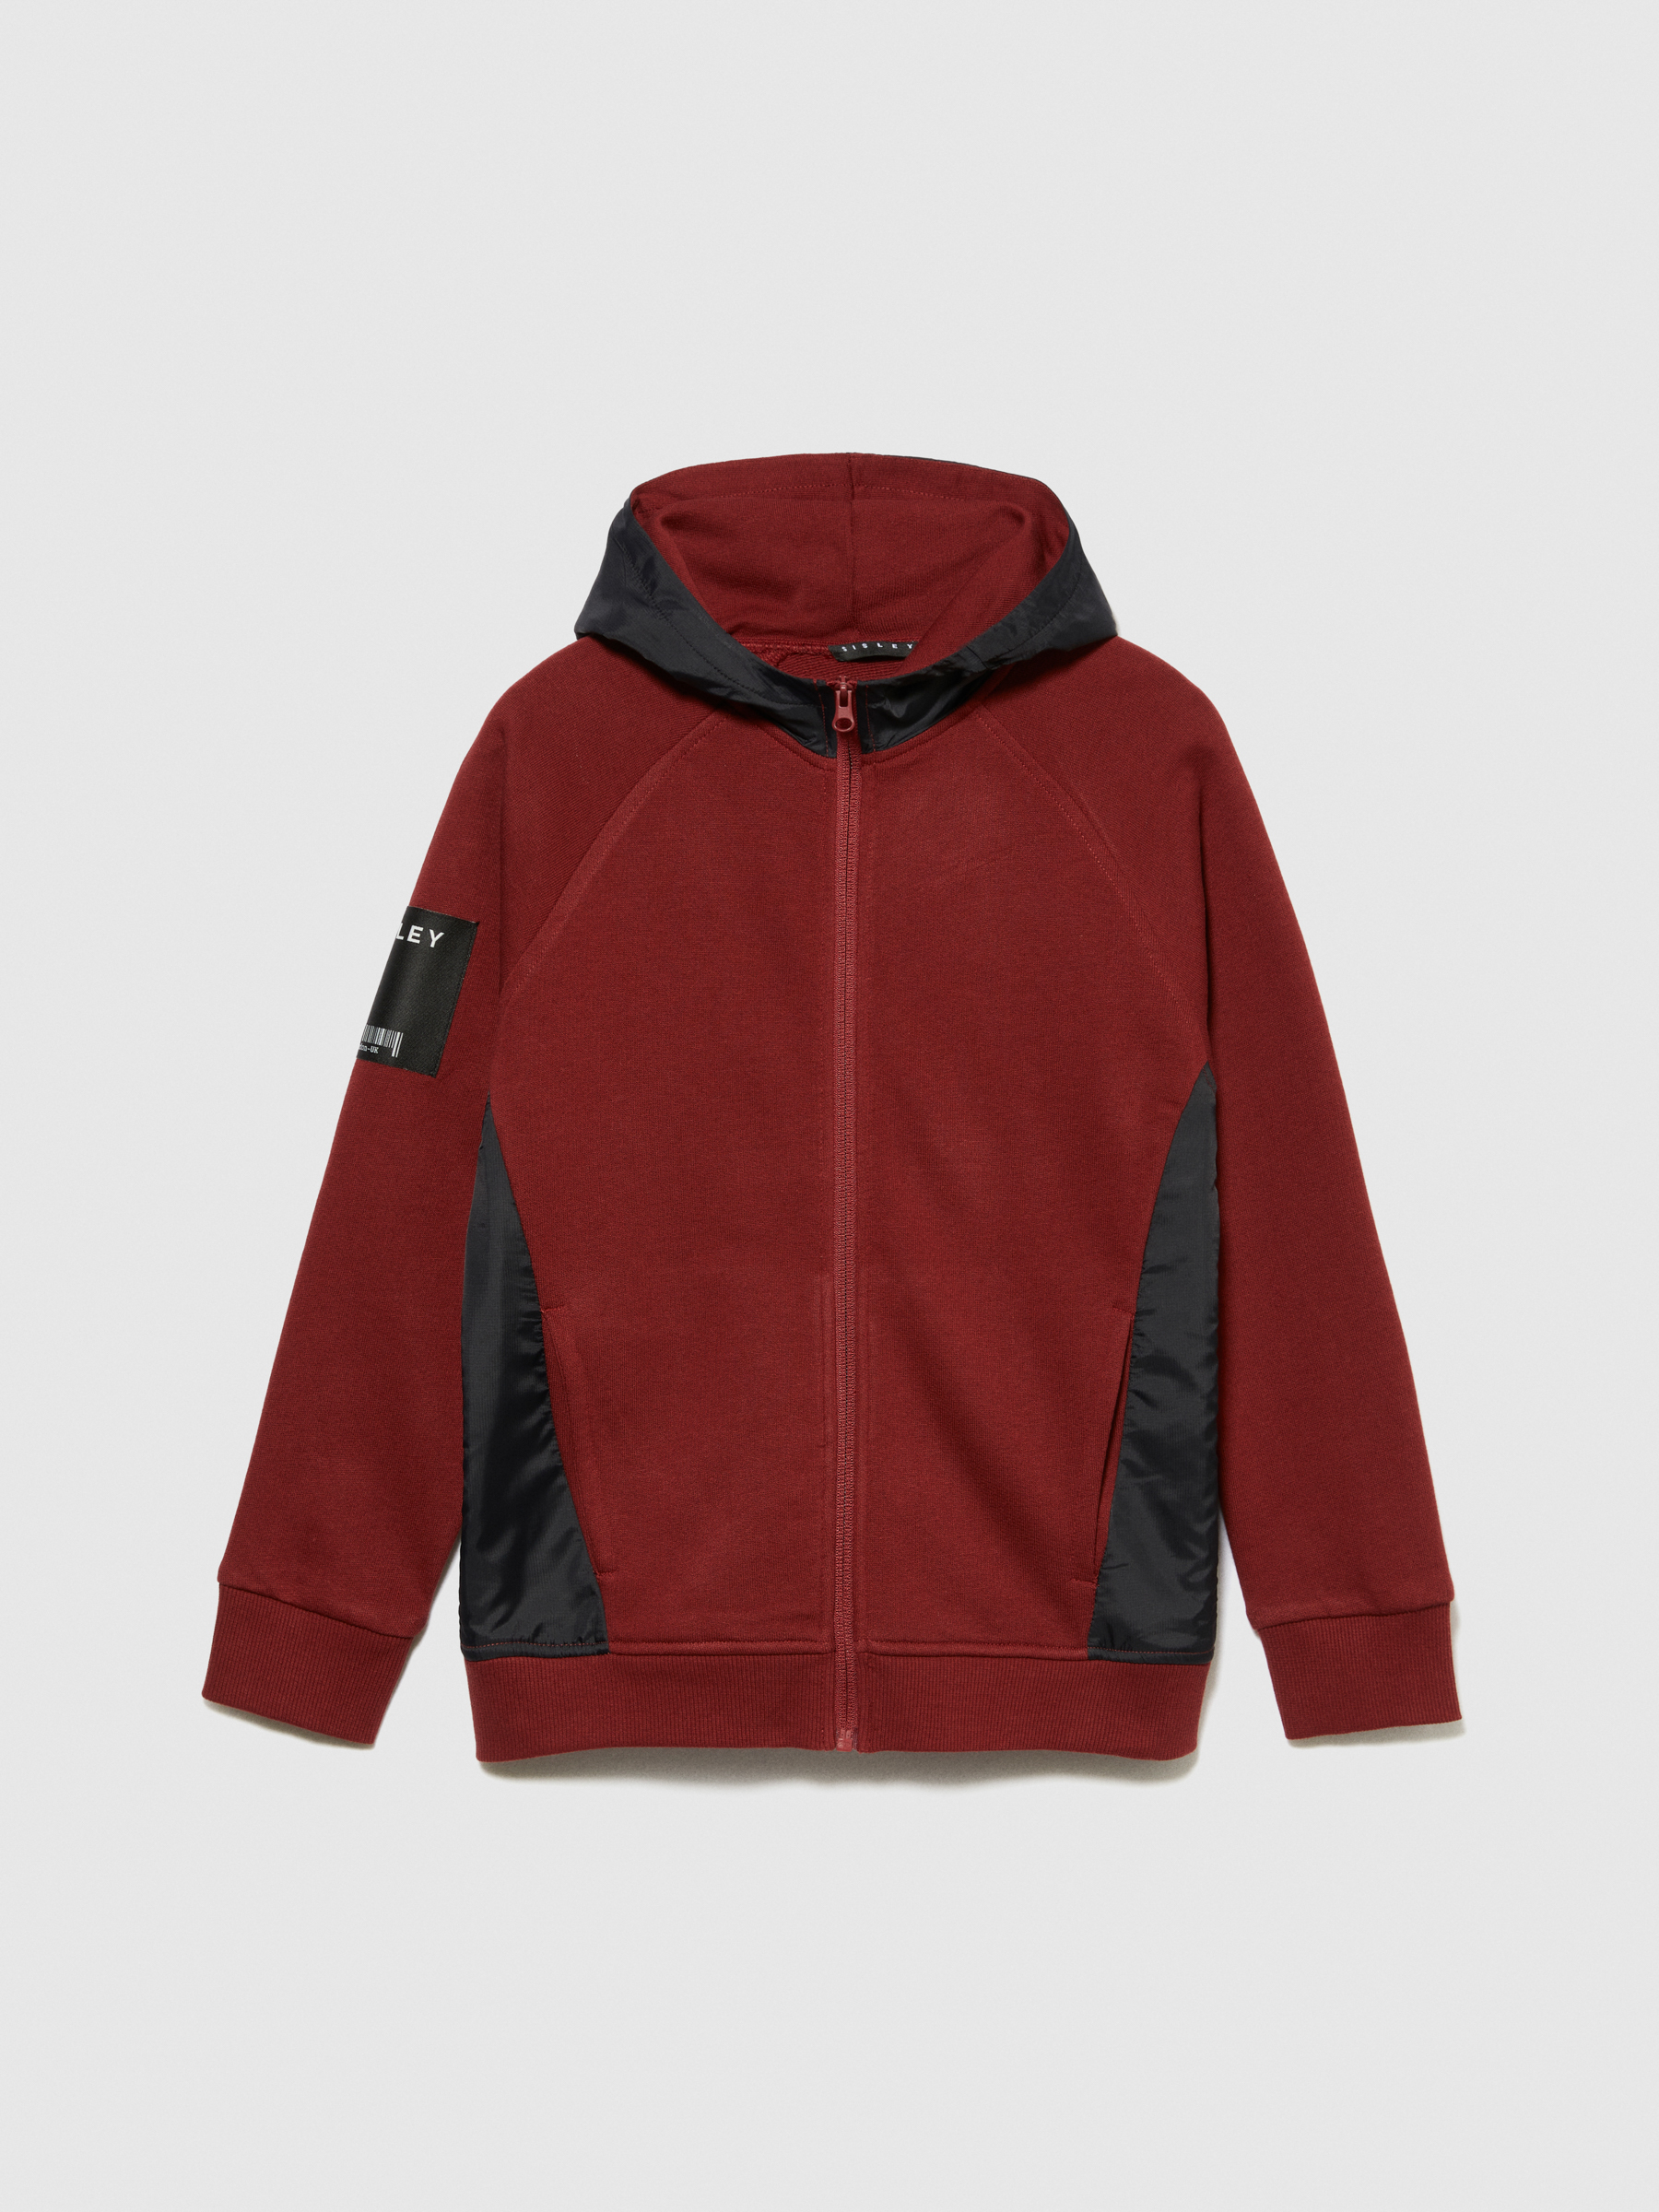 Sisley Young - Mixed Material Hoodie, Man, Burgundy, Size: KL